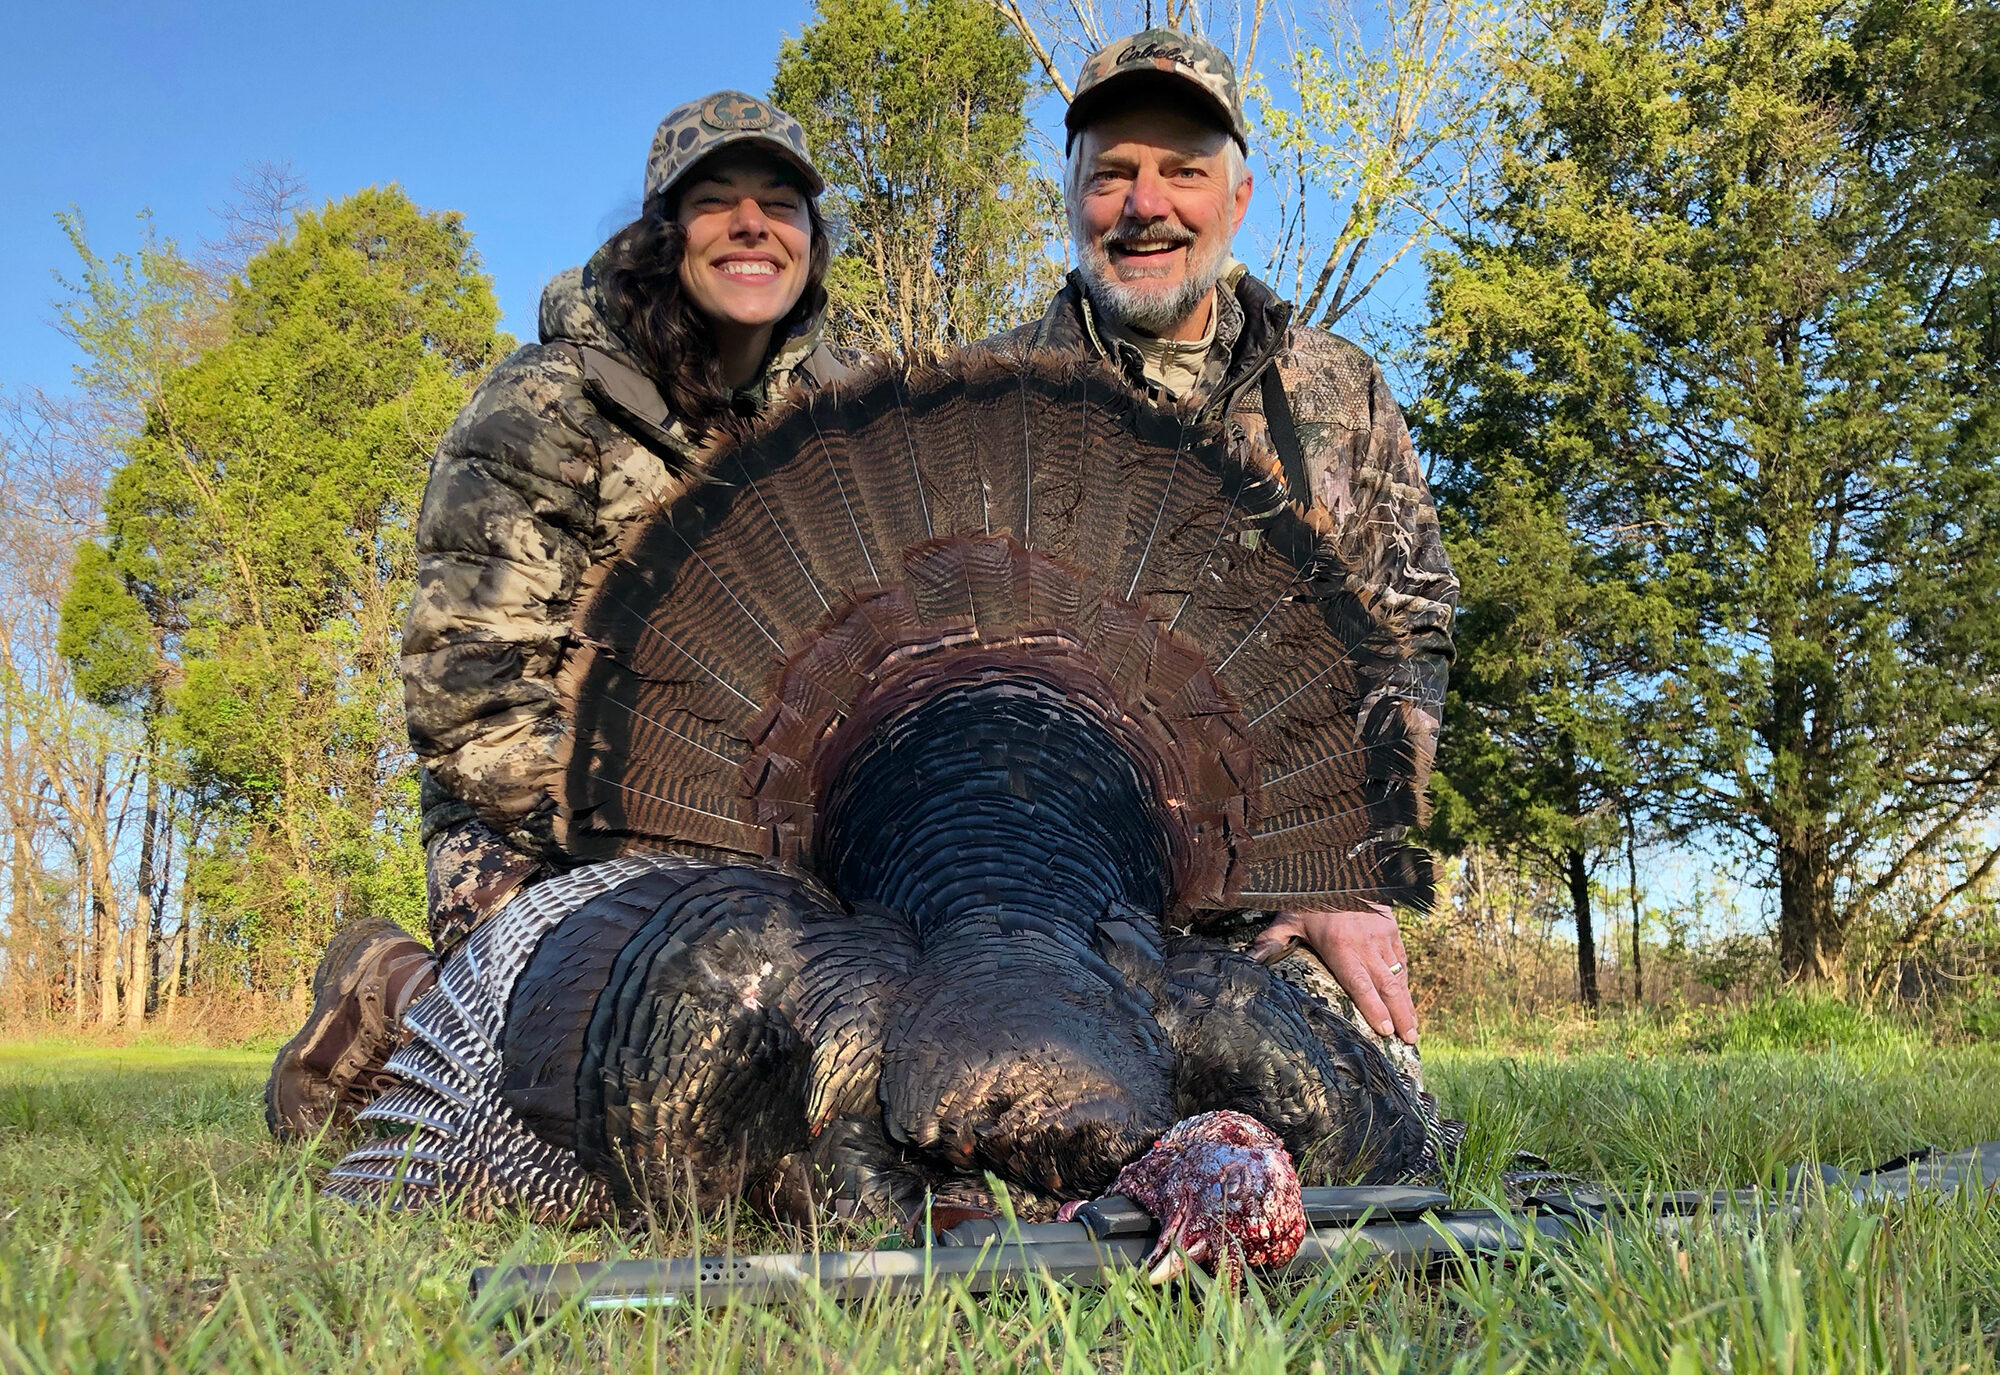 Natalie Krebs with her father after a turkey hunt.